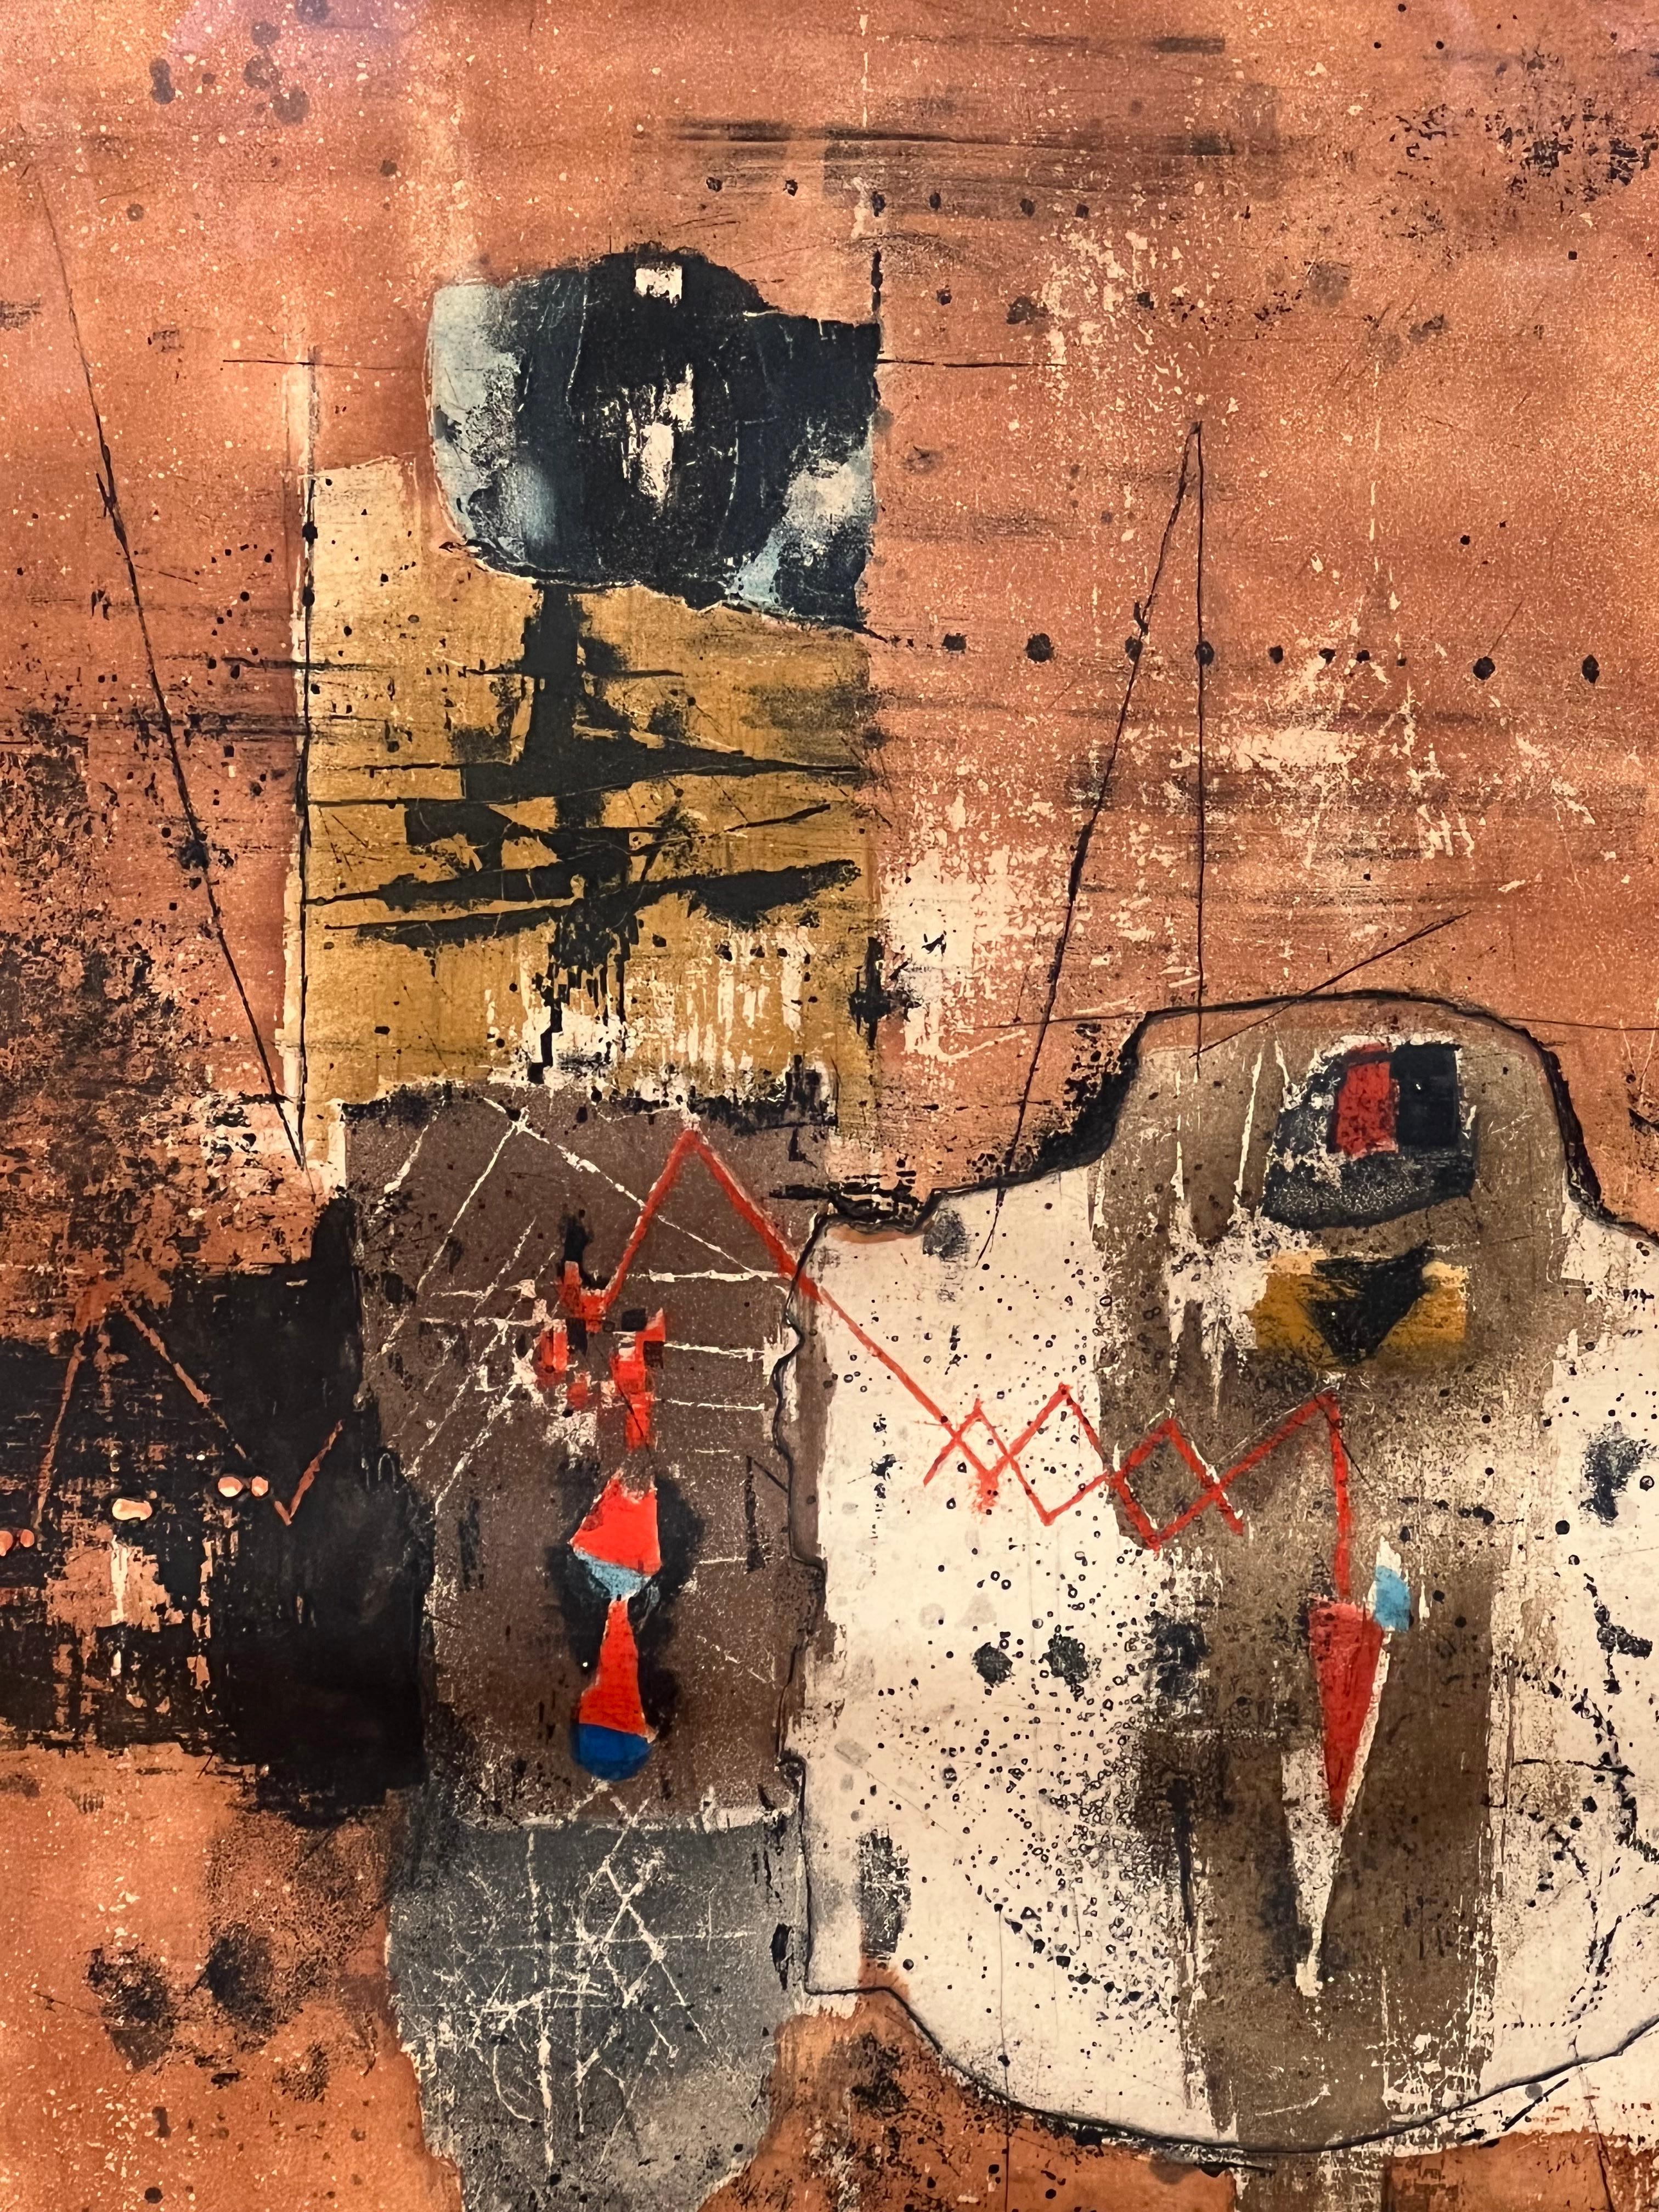 This lithograph by Johnny Friedlander, numbered 28/95 on the bottom left corner and signed on the right, presents an abstract composition against a rust-colored backdrop titled 